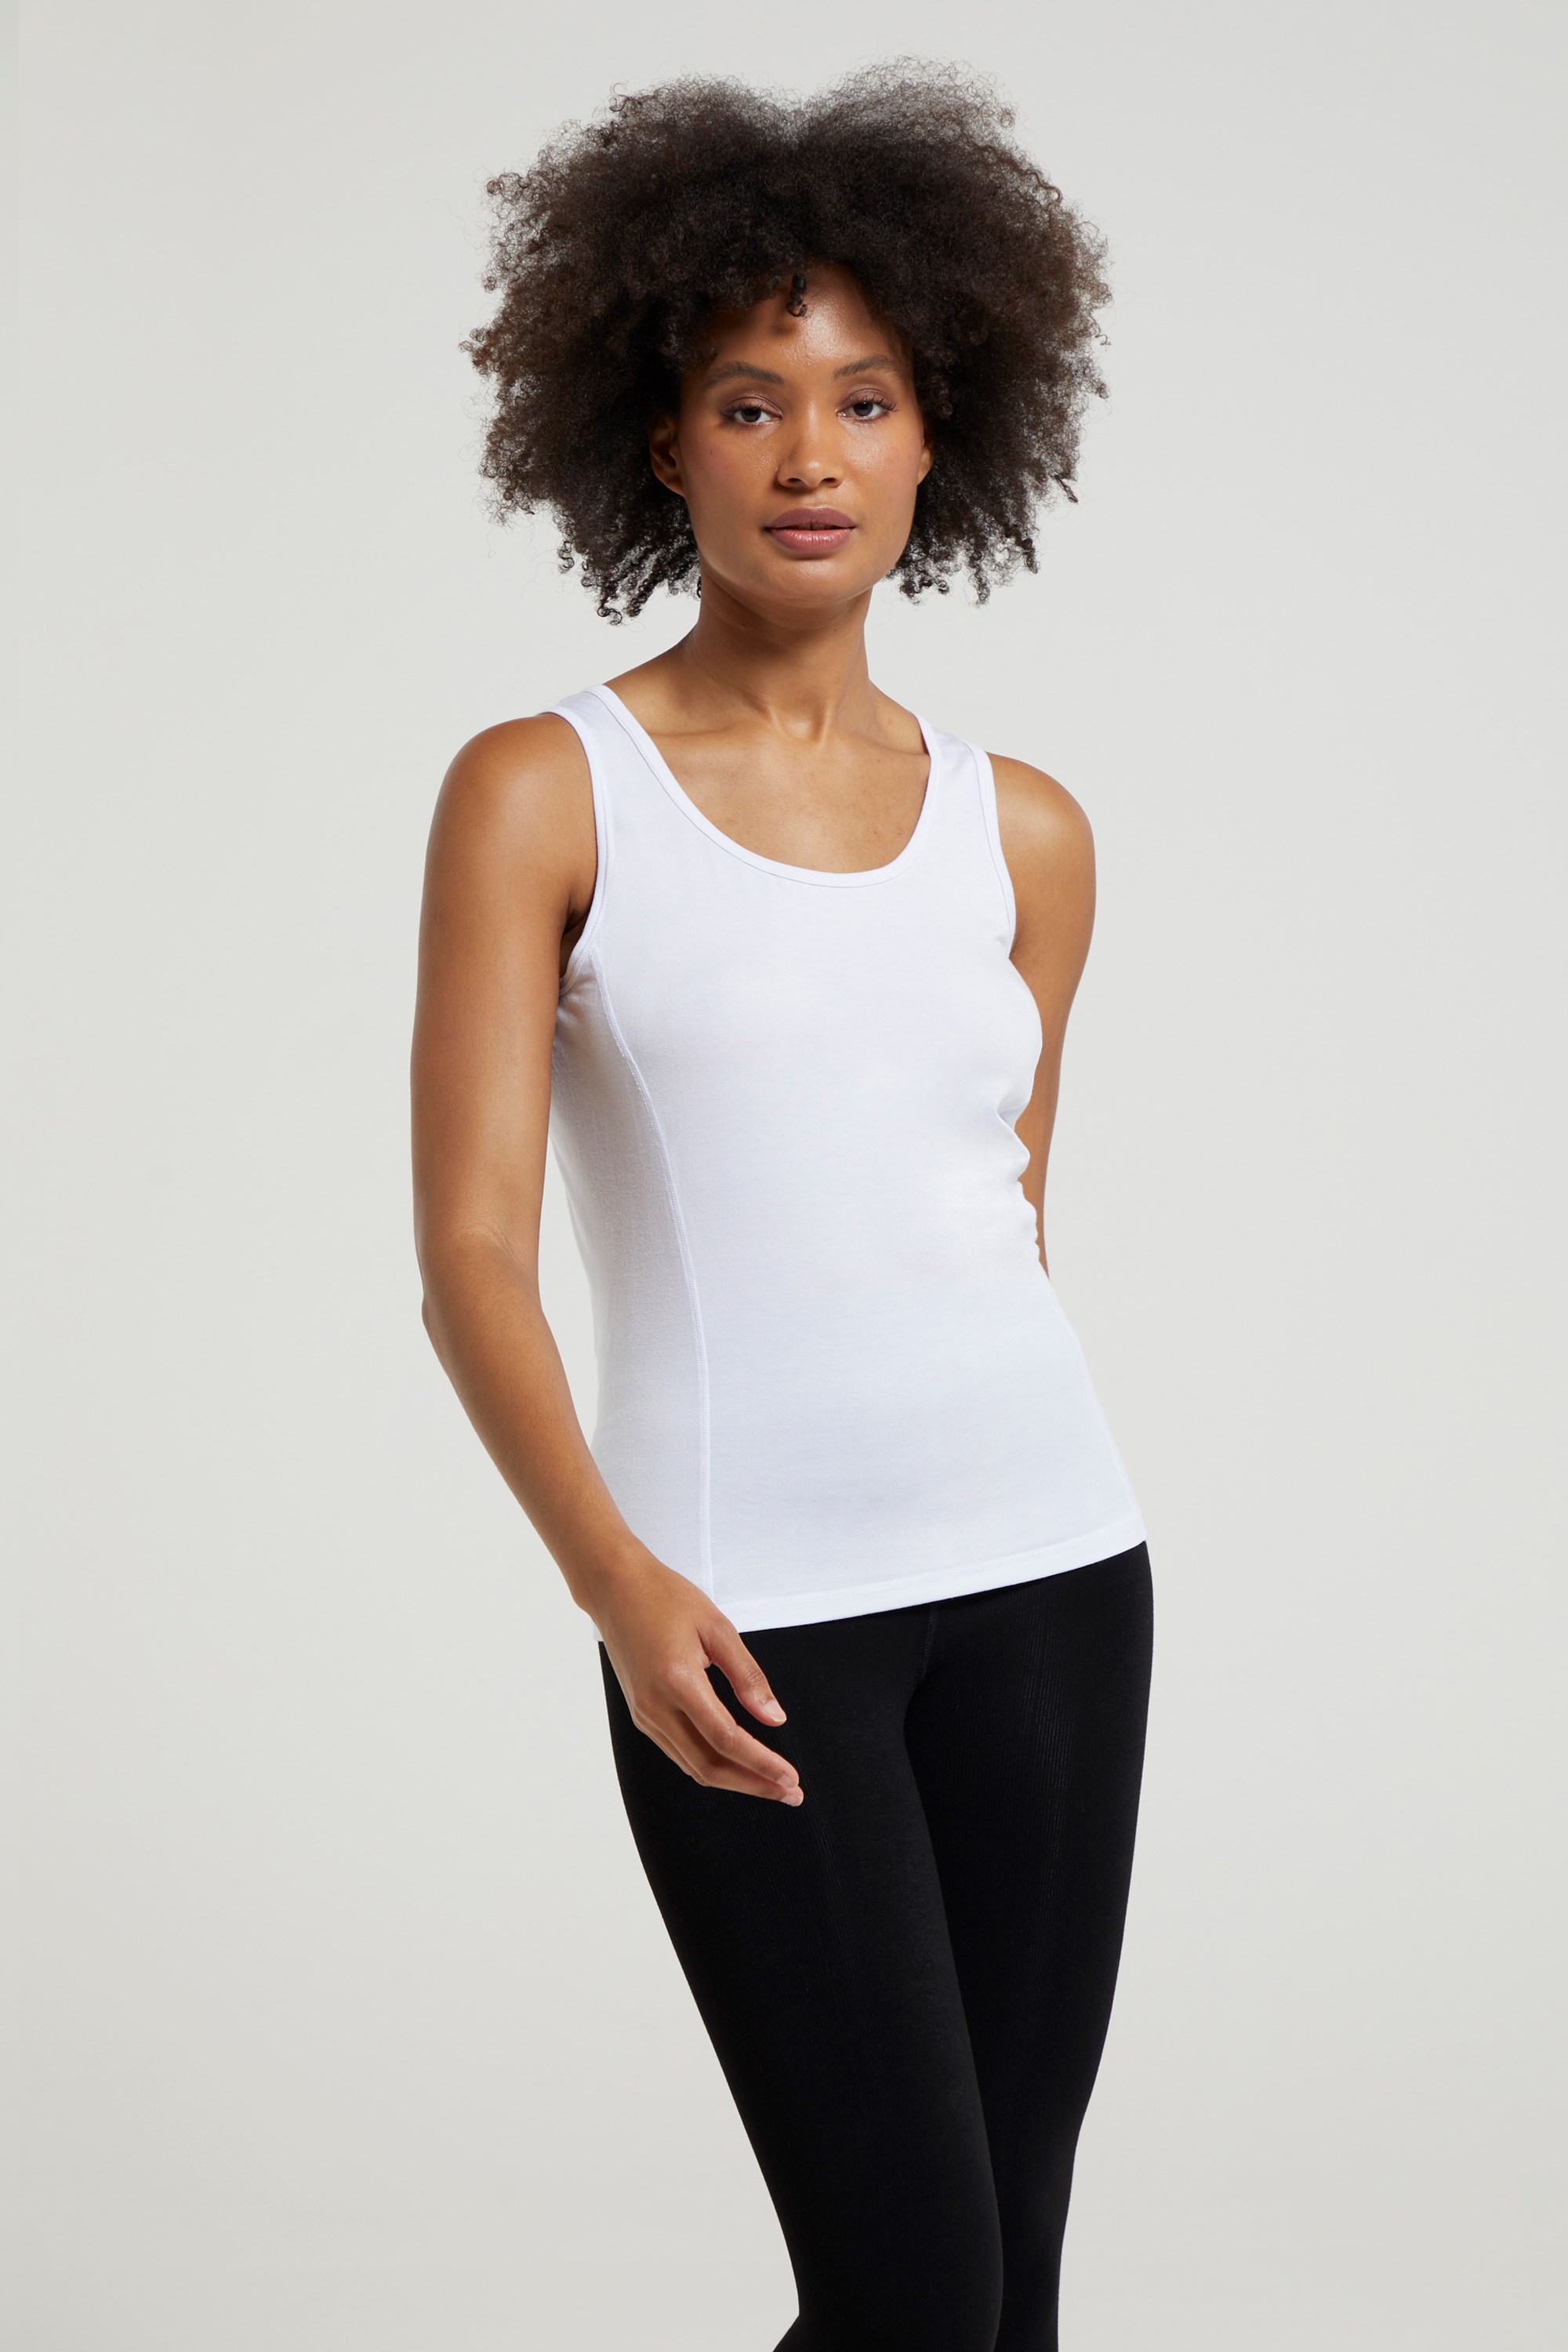 Thermal Camisole Tops - Buy Women's thermal camisole tops online